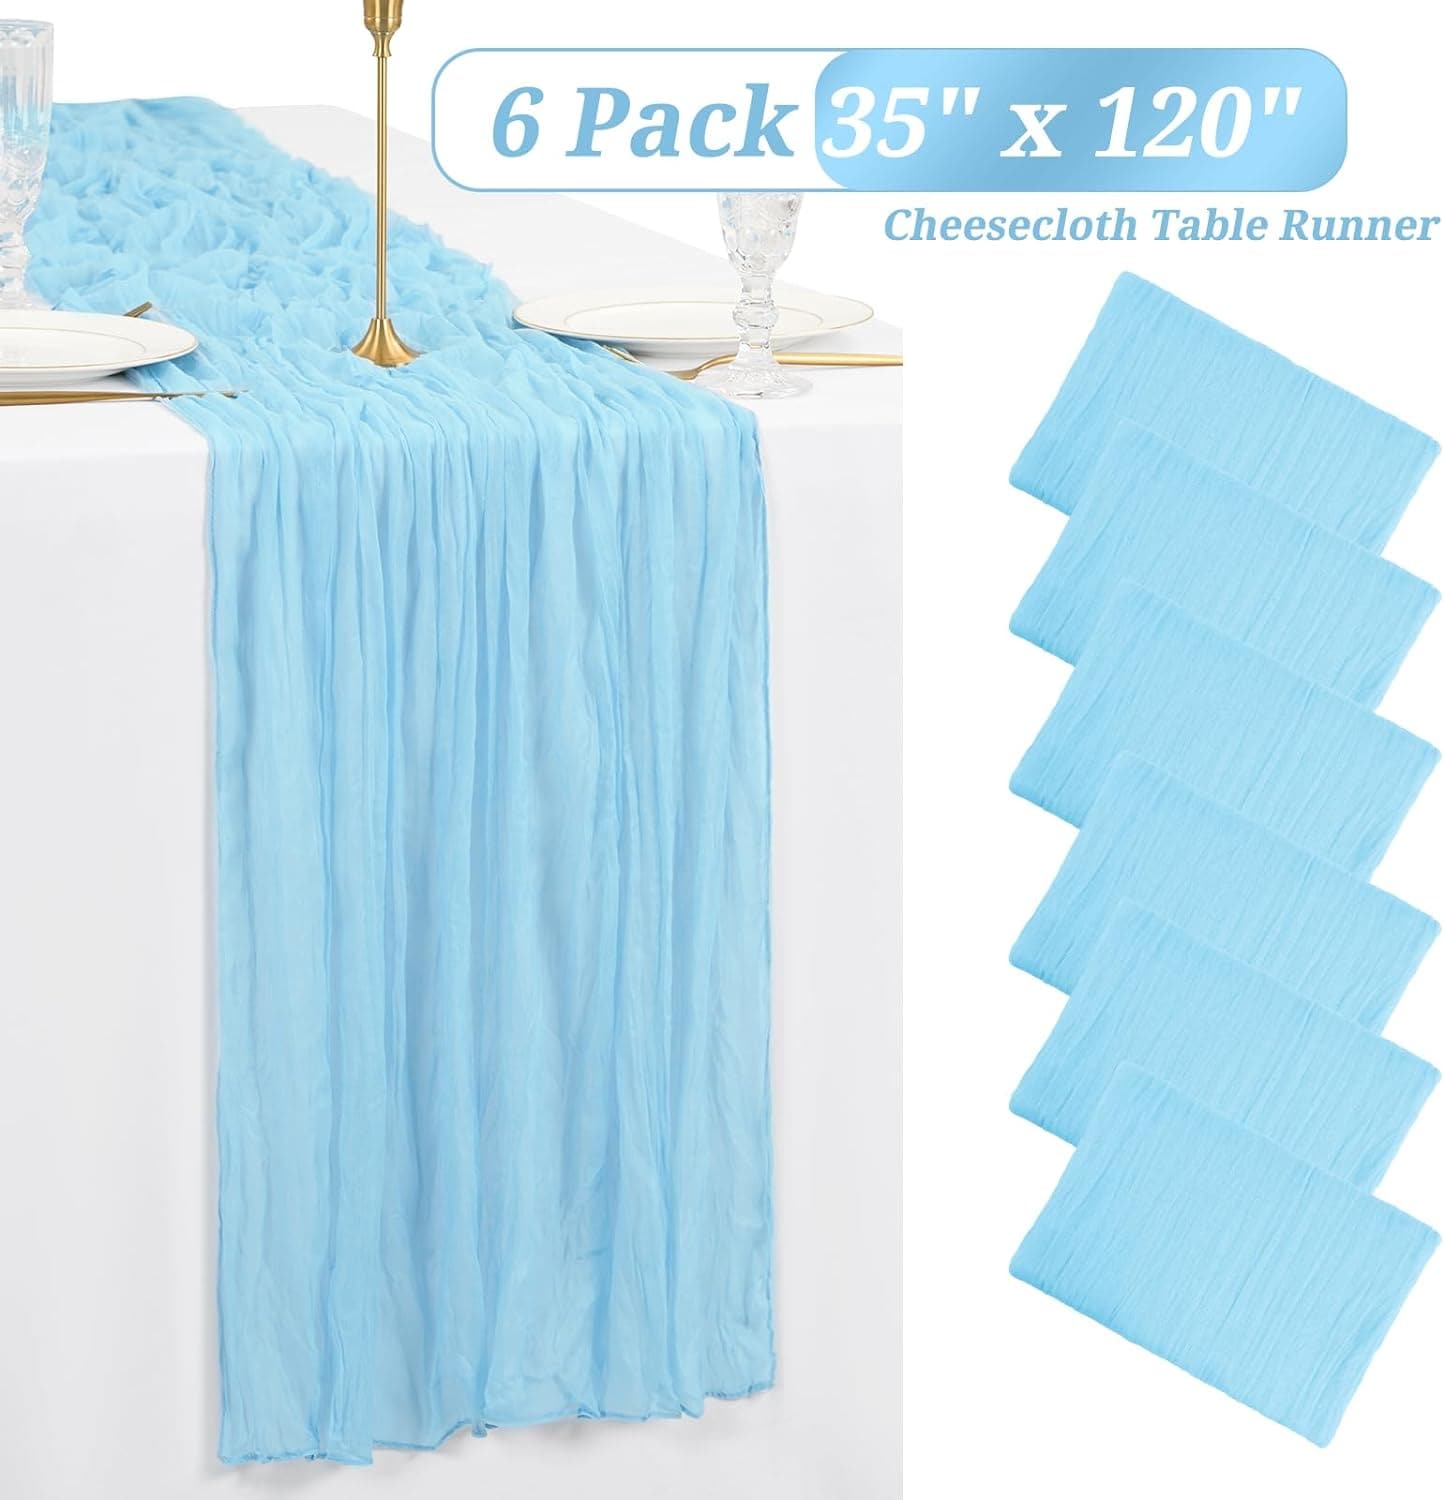 Cheesecloth Table Runner 13FT 10 pack